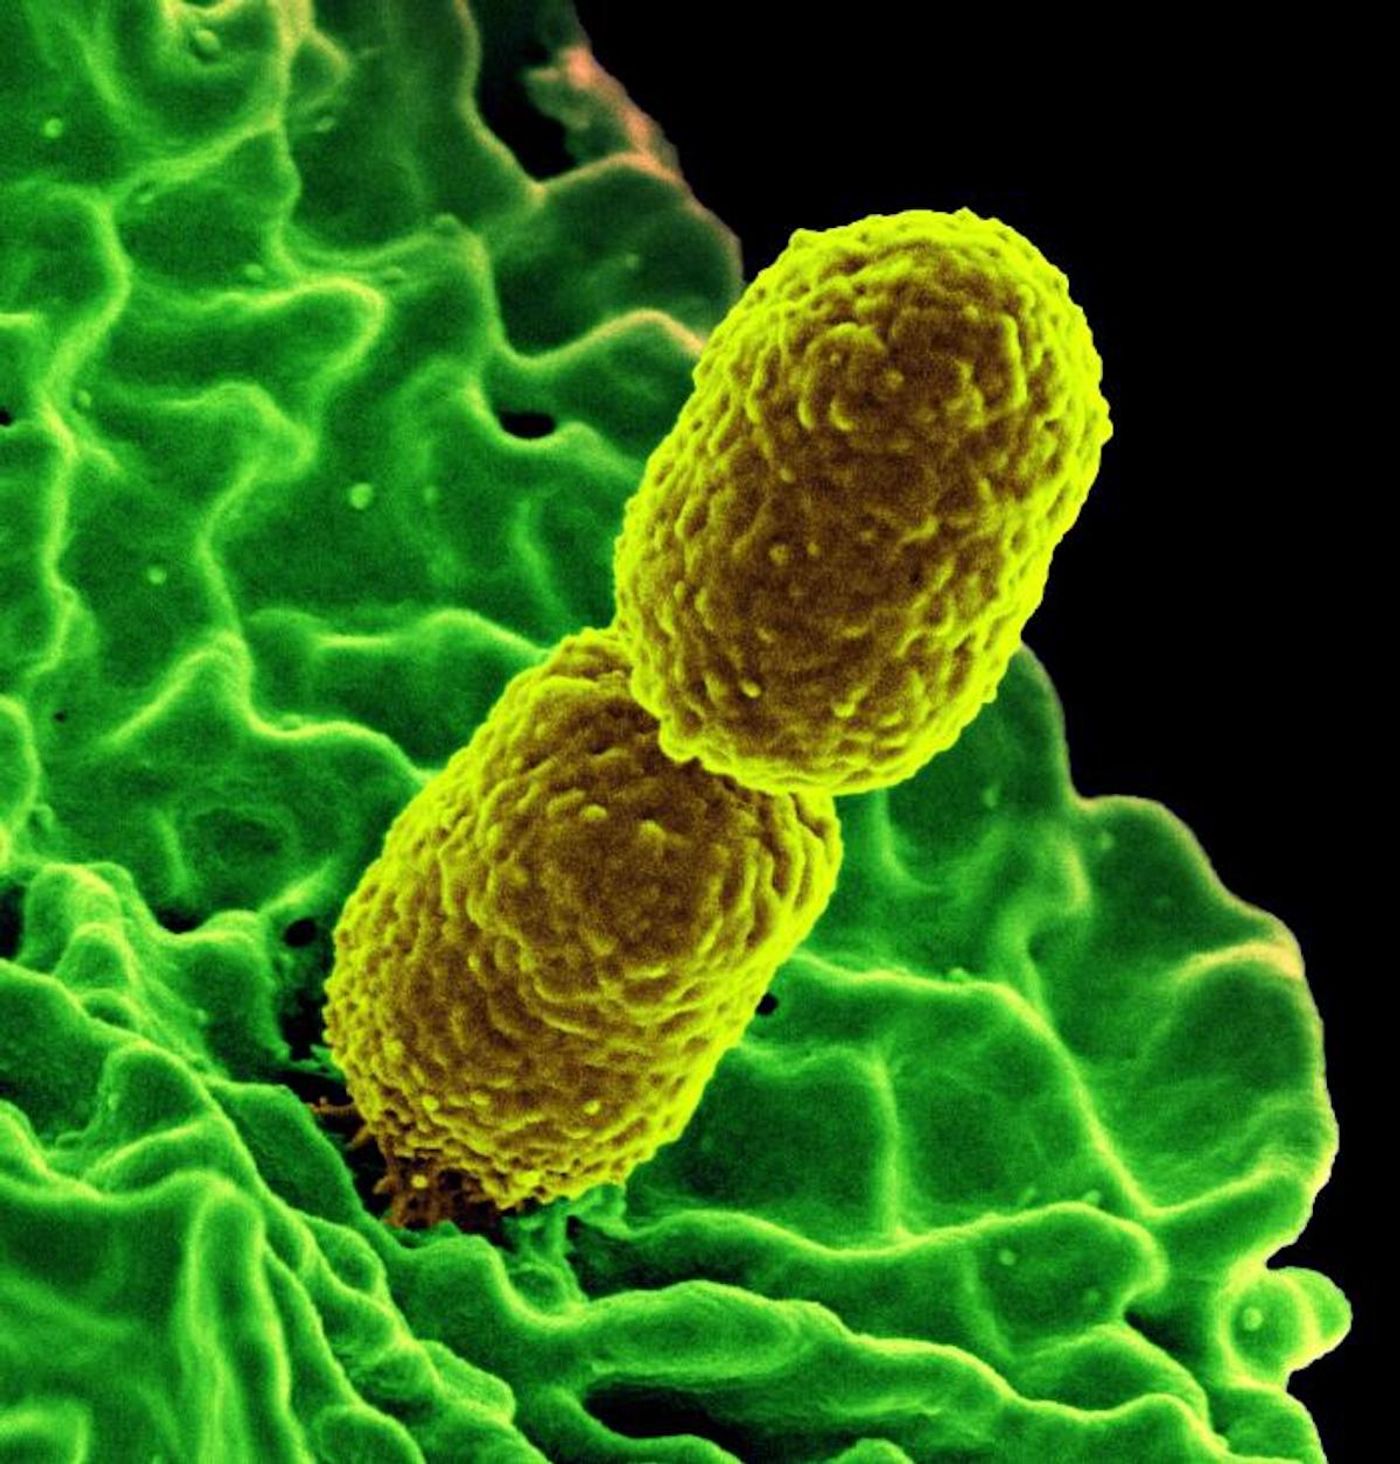 A National Institute of Allergy and Infectious Diseases (NIAID) digitally colorized SEM image of two carbapenem-resistant Klebsiella pneumoniae bacteria (yellow) interacting with a neutrophil (green) / Credit: National Institute of Allergy and Infectious Diseases (NIAID)